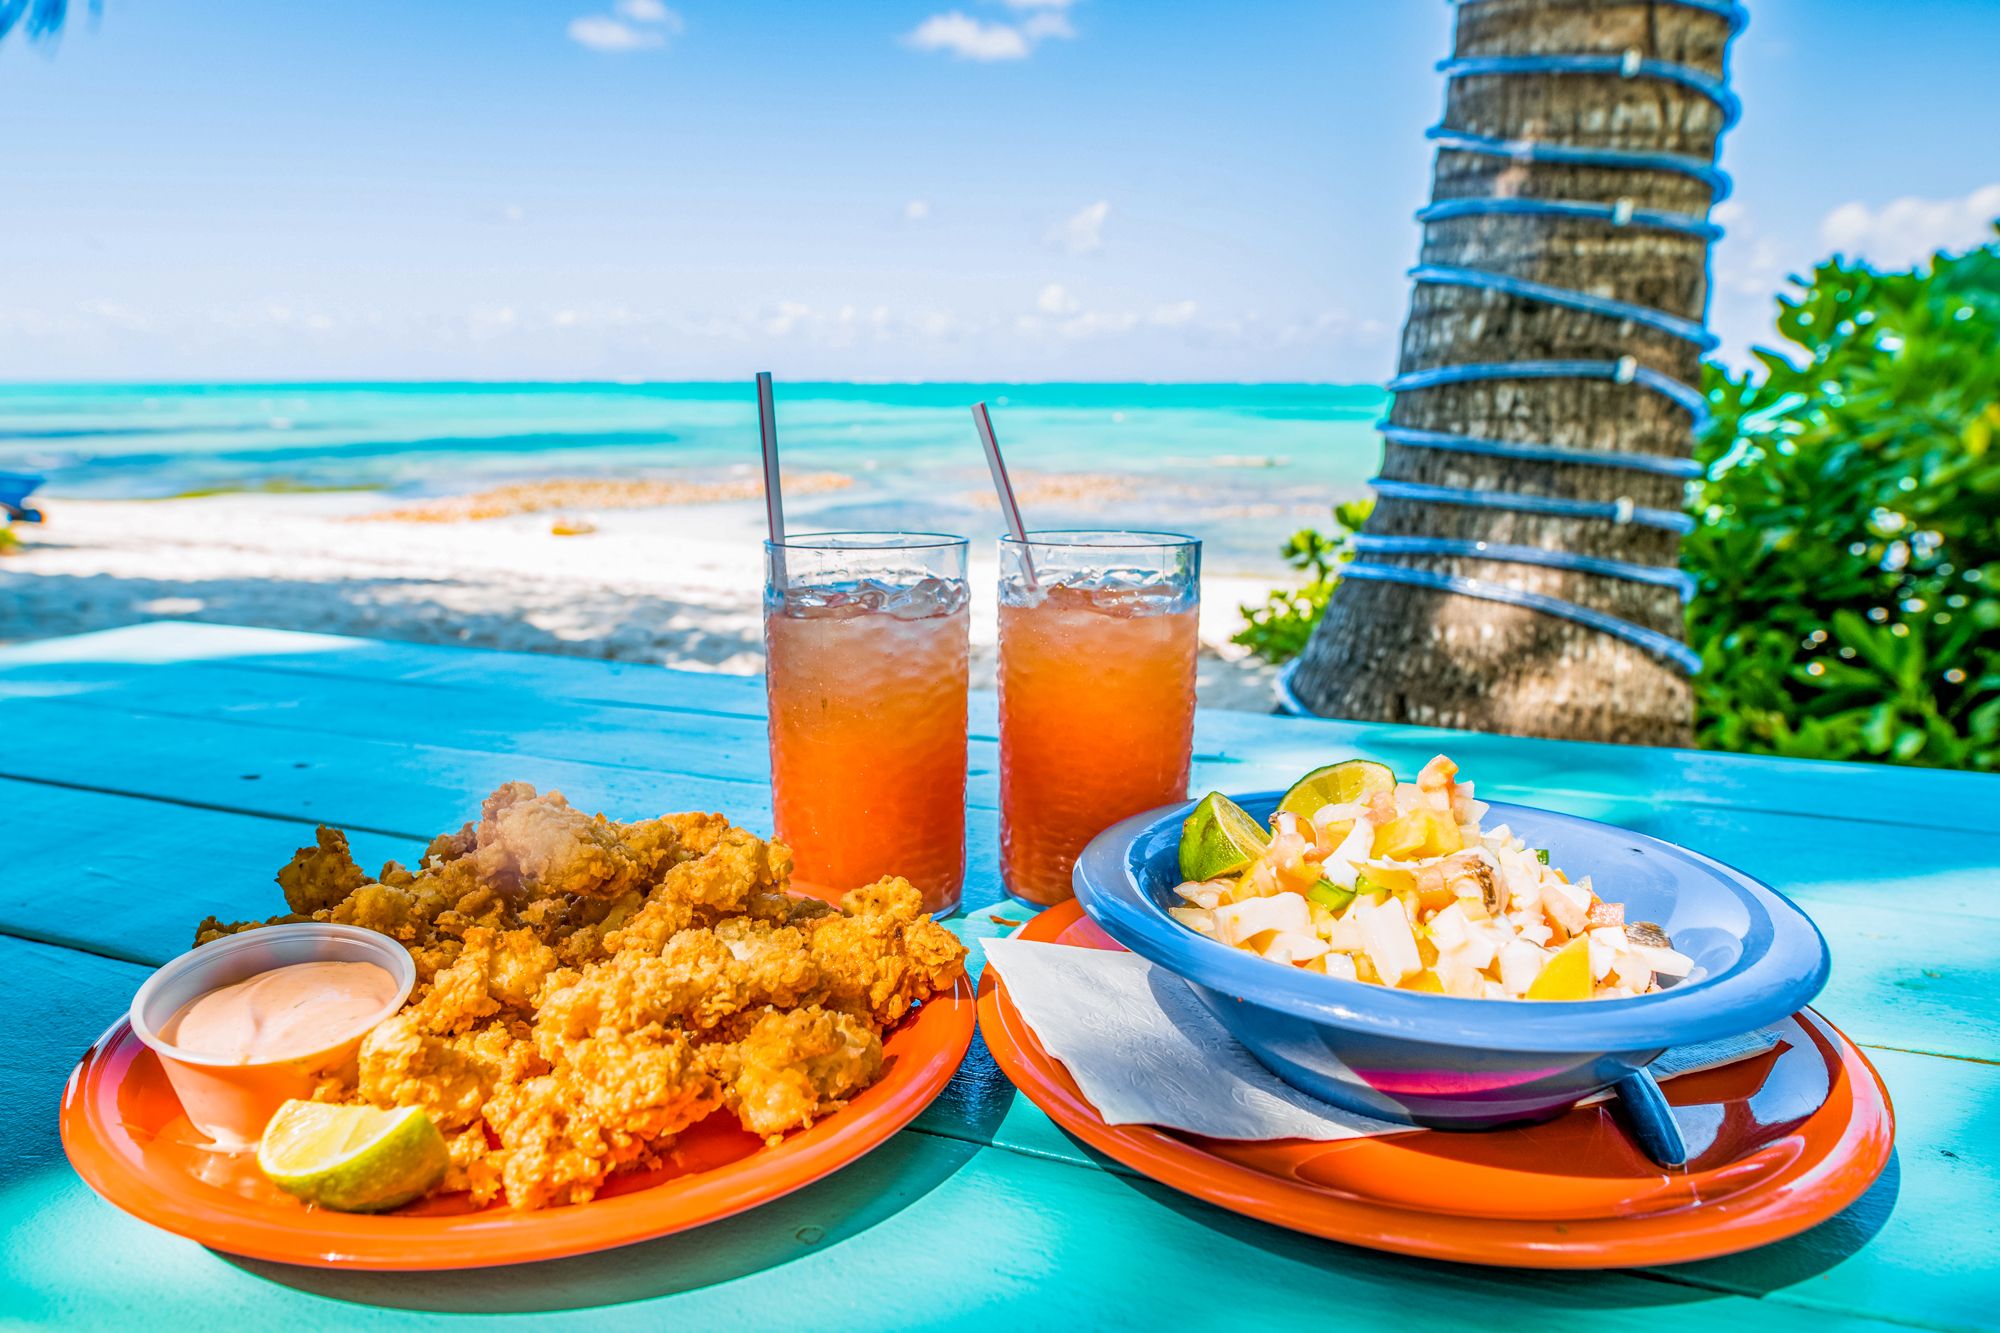 Conch fritters conch salad punch Bahamas